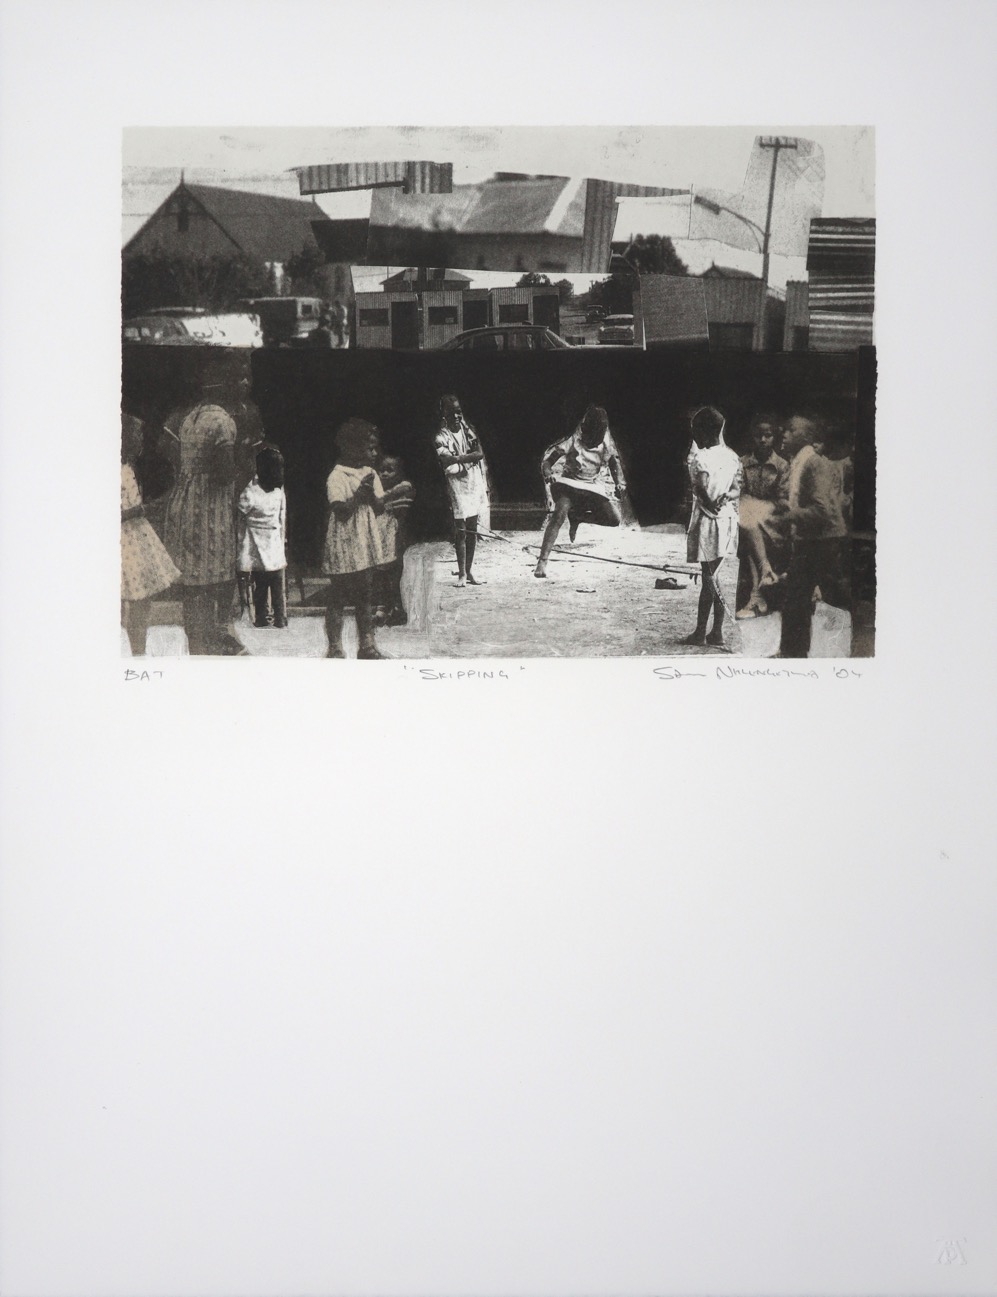 Collaged image of a group of girls skipping with crowded buildings in background